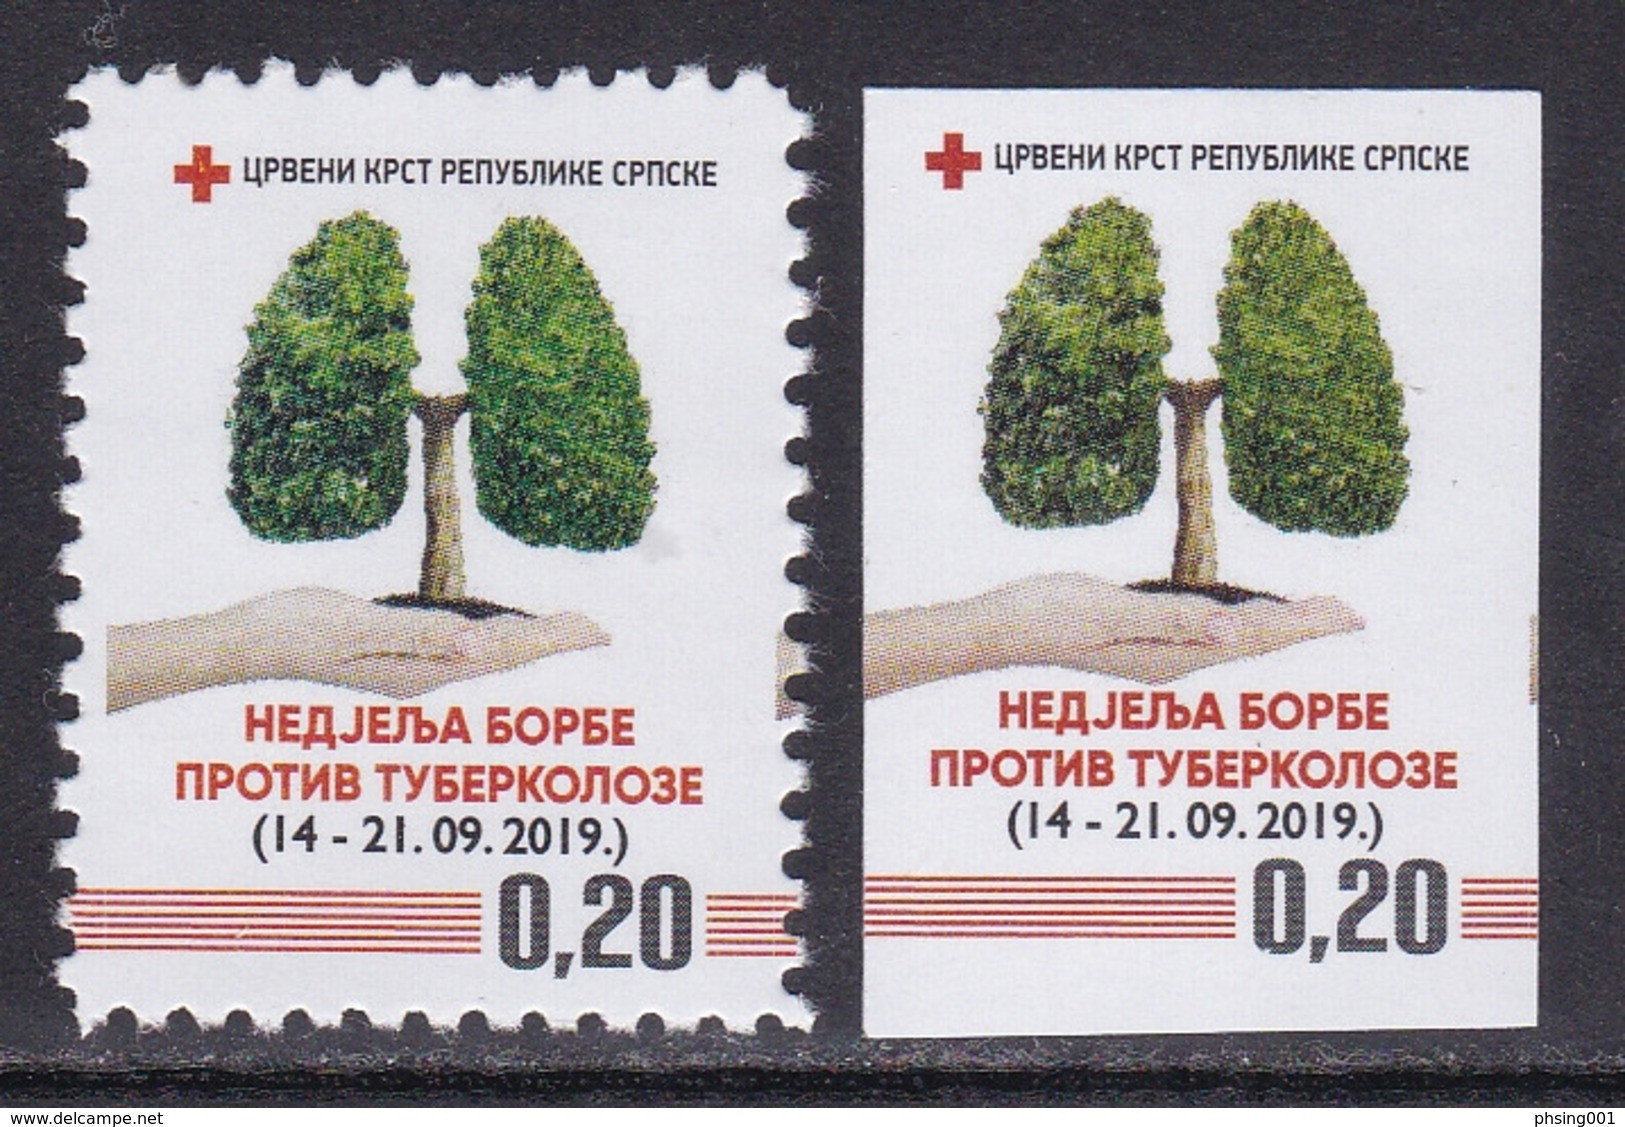 Bosnia Serbia 2019 TBC Red Cross Tax Charity Surcharge, Perforated + Imperforated Stamp MNH - Croix-Rouge